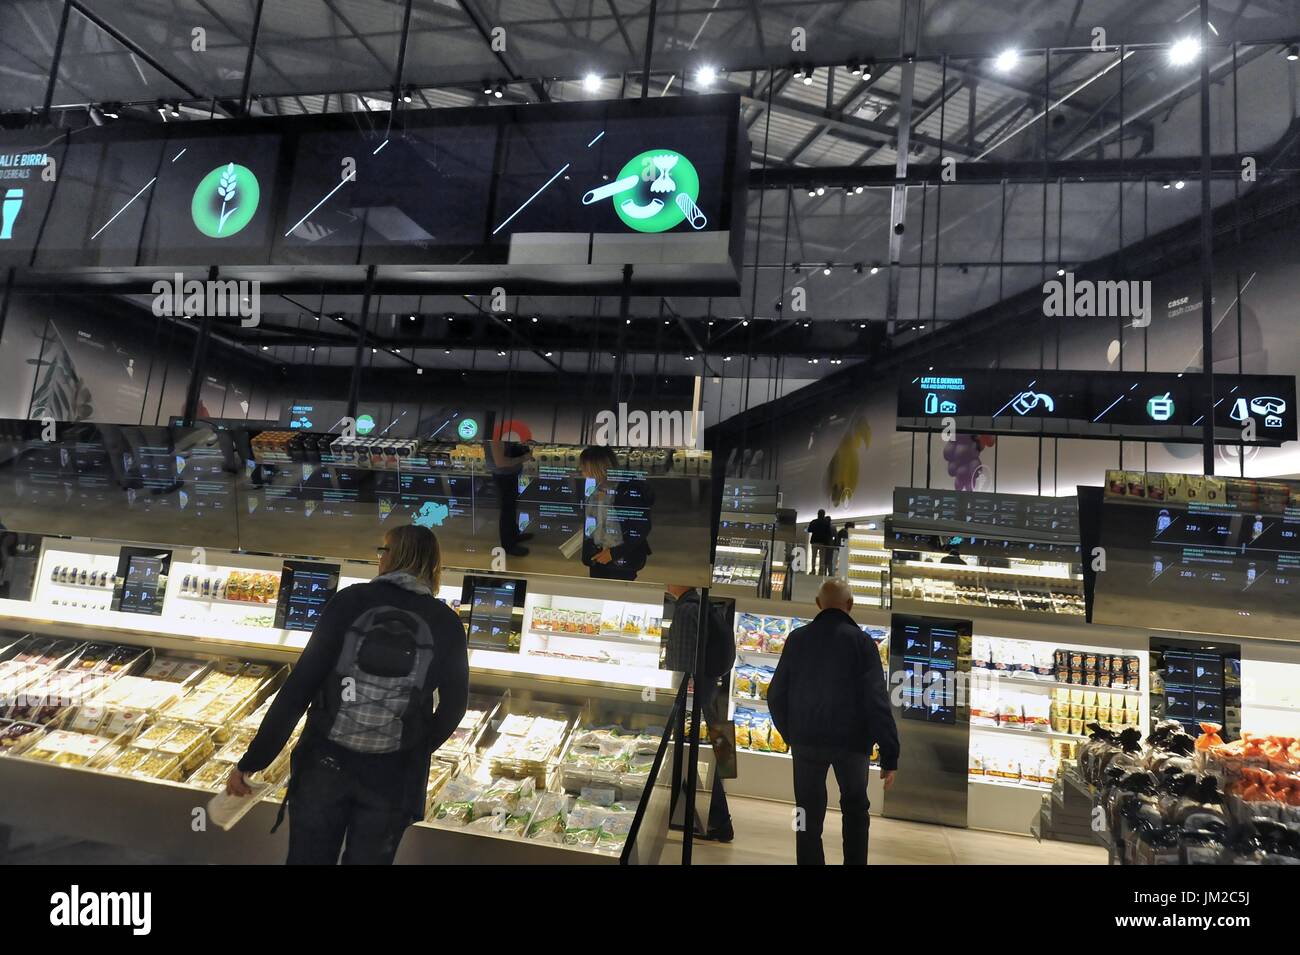 Future Food District, the supermarket of the future, made by Coop, the League of Italian Cooperatives. Presented for the first time at Milan's World Expo 2015, and then reopened in 2016 in the Bicocca district. Customers can experiment and try new ways to shop: large touch-screen high-tech monitors show additional product information, including the origin, nutritional values, the possible presence of allergenic ingredients, instructions for disposal and related products. Fundamental Issues related to food, shopping and sustainability Stock Photo